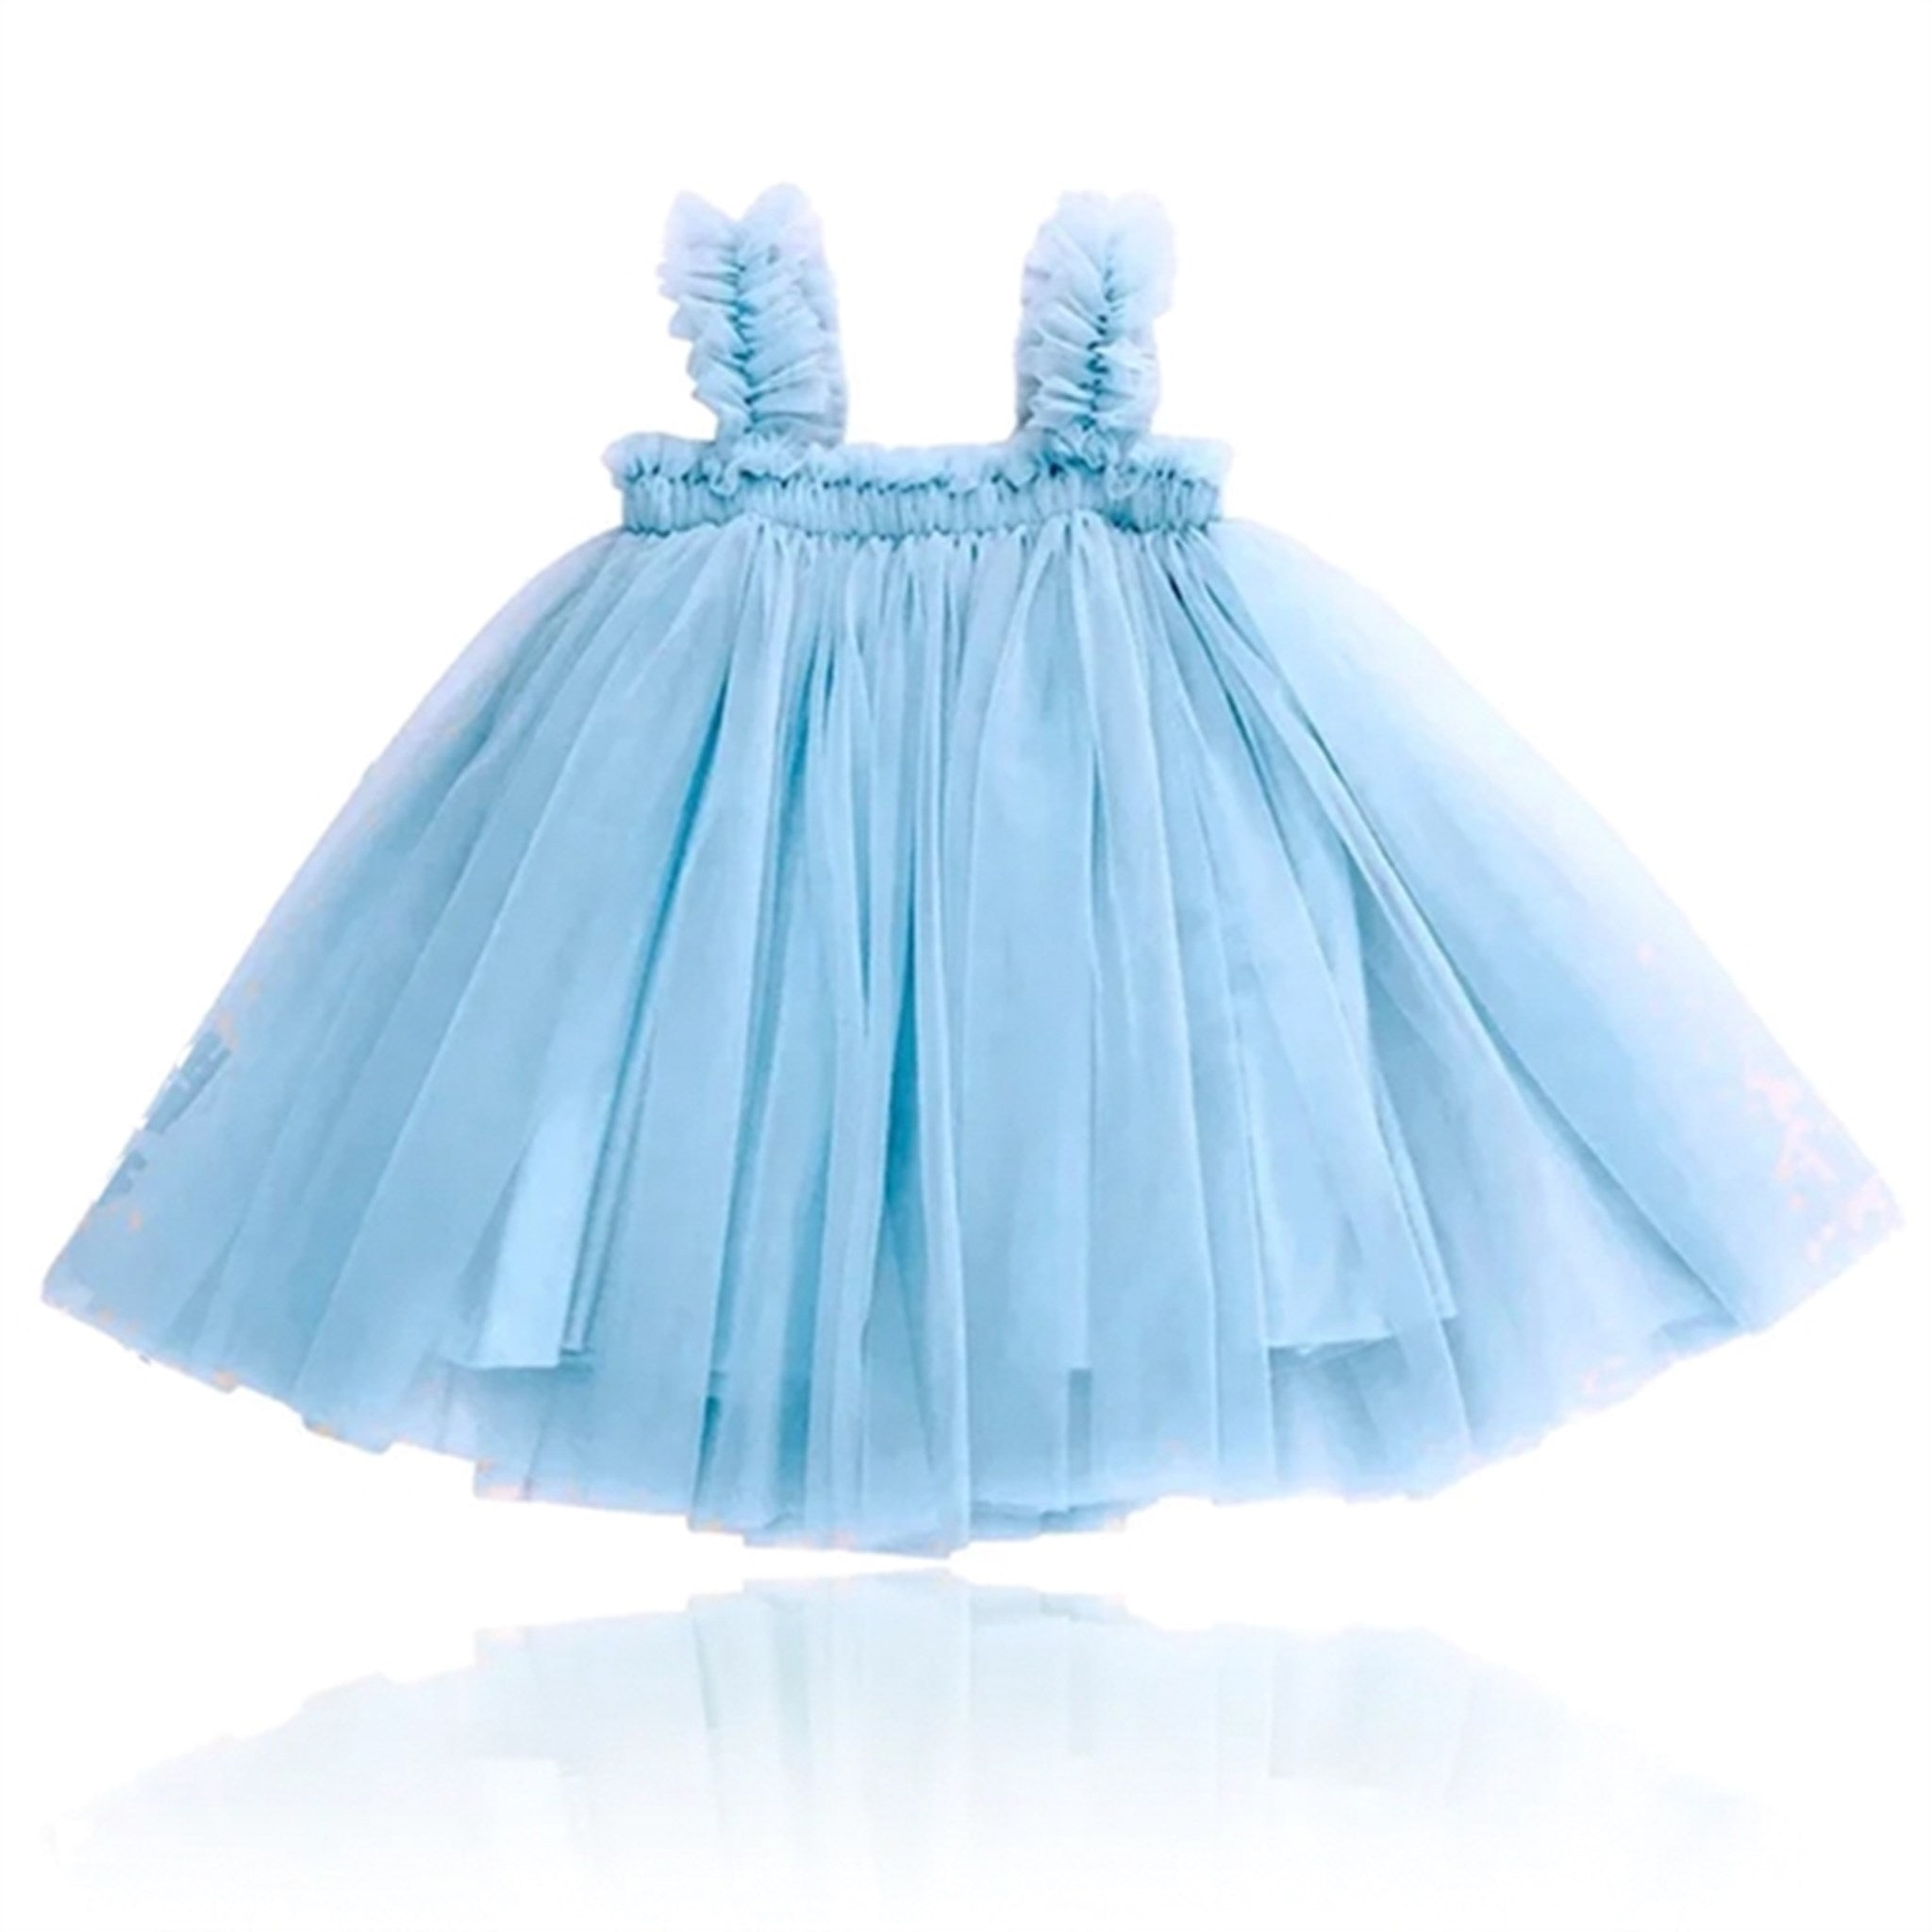 Dolly By Le Petit Tom 2 Way Tutu Dress Beach Cover Up Light Blue